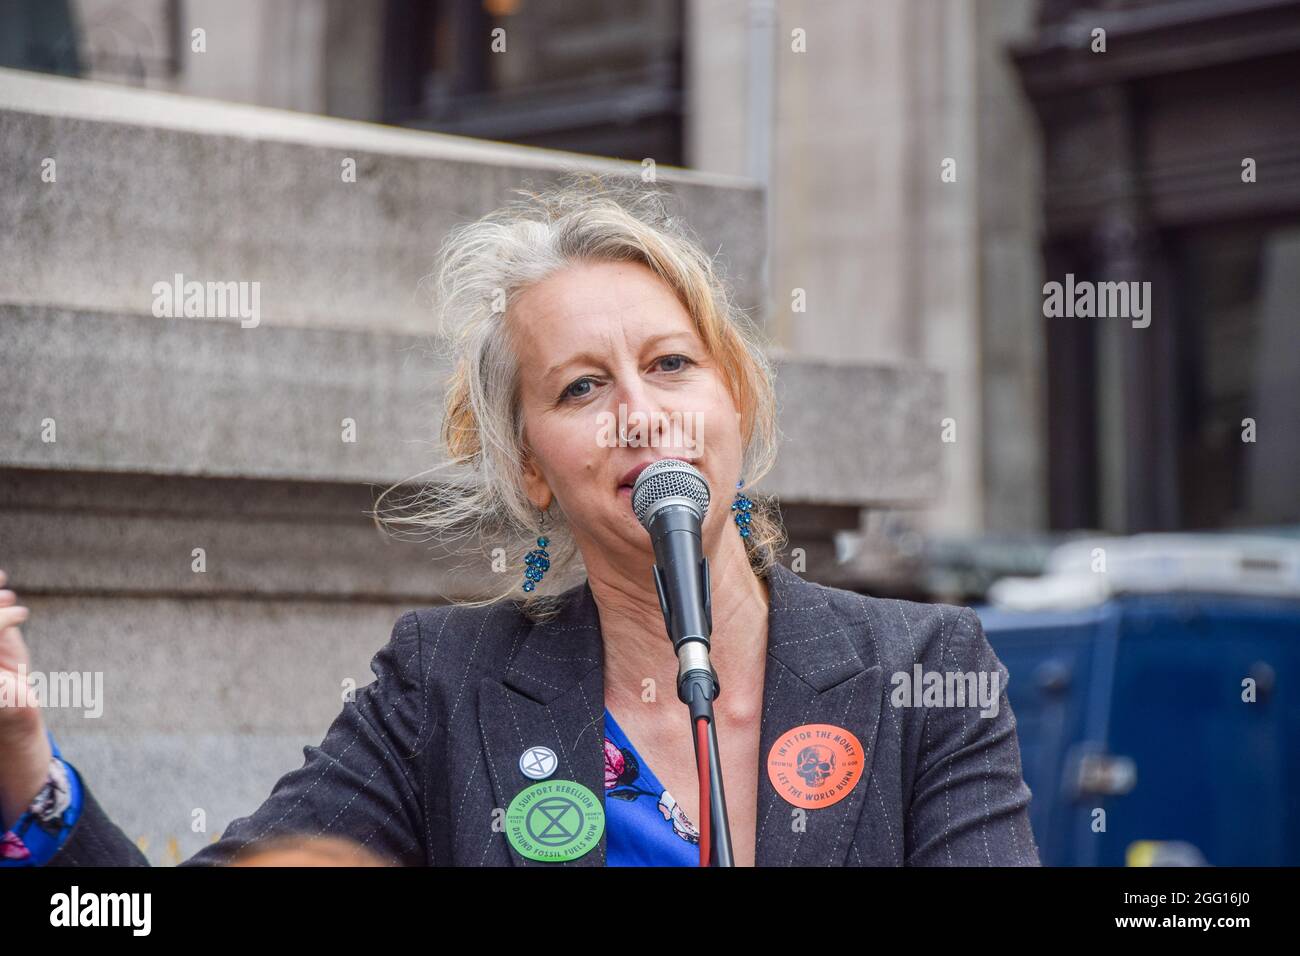 London, UK. 27th Aug, 2021. Extinction Rebellion co-founder Gail Bradbrook speaks to the protesters outside The Royal Exchange during the demonstration. Extinction Rebellion protesters staged the Blood Money March, part of their two-week Impossible Rebellion campaign, targeting the City of London, the capital's financial hub. Credit: SOPA Images Limited/Alamy Live News Stock Photo